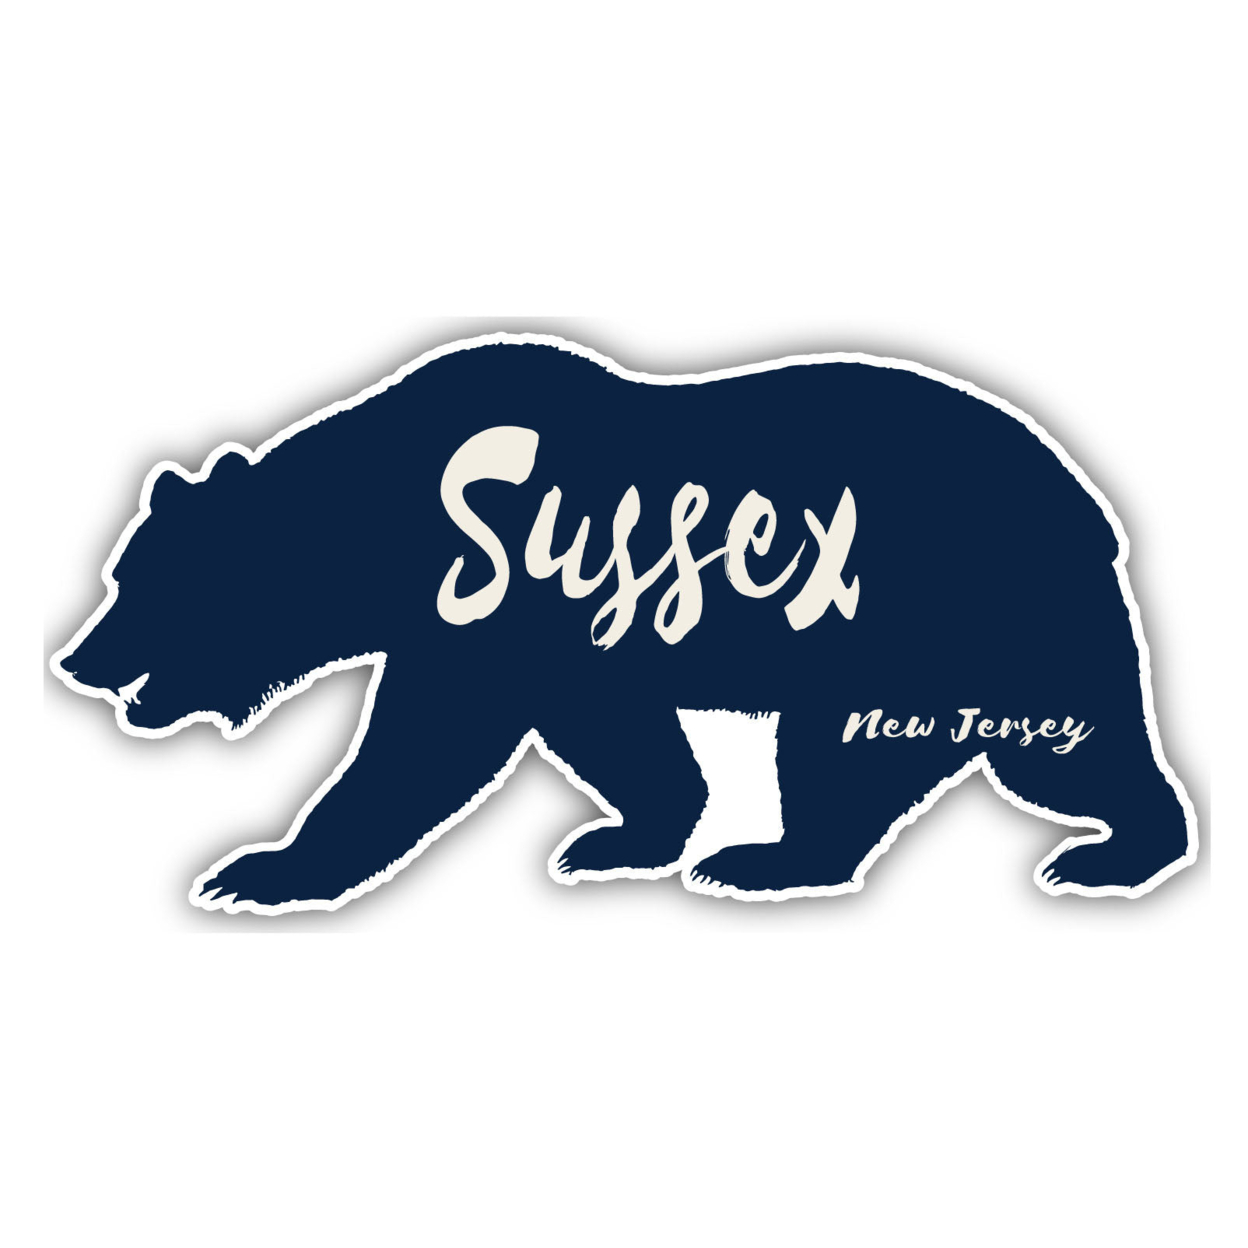 Sussex New Jersey Souvenir Decorative Stickers (Choose Theme And Size) - Single Unit, 2-Inch, Bear